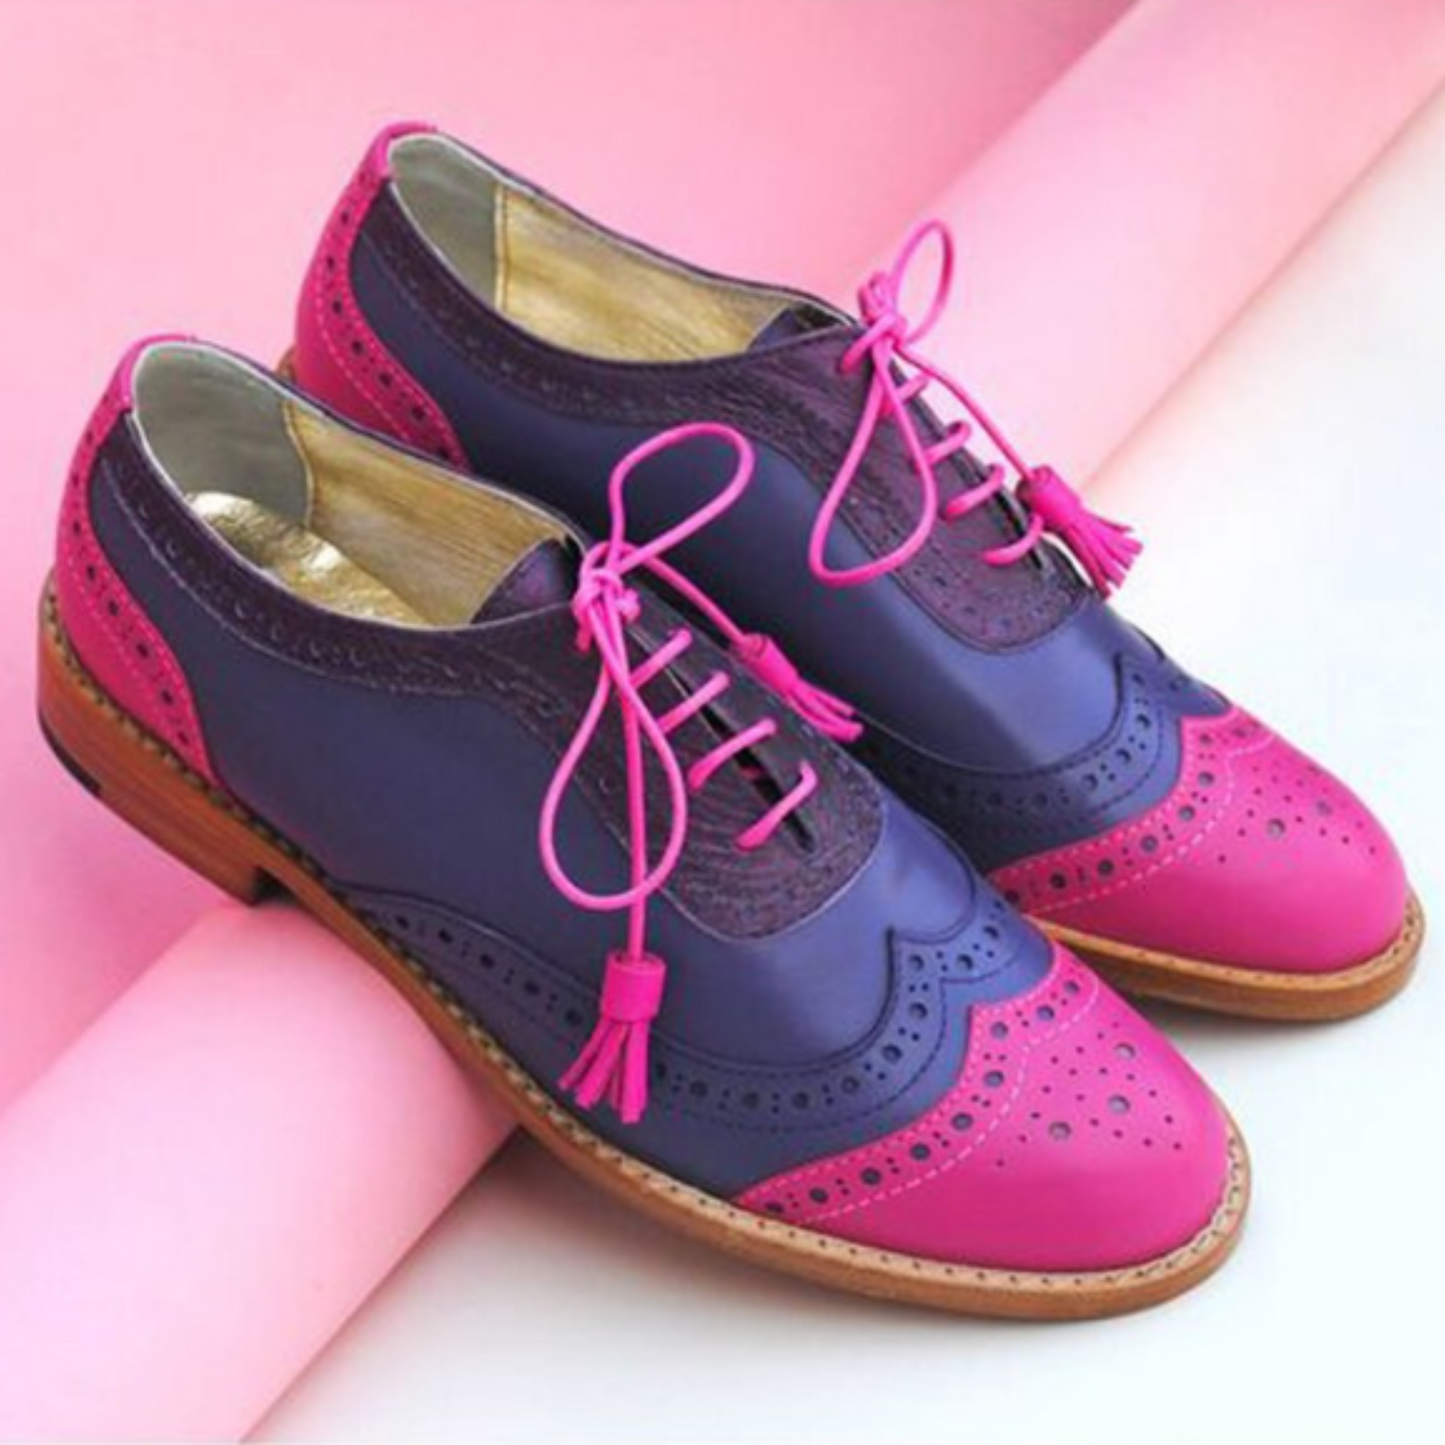 Goodyear Welted Women's Blue and Pink Leather Oxford Lace up Brogue Dress Shoes